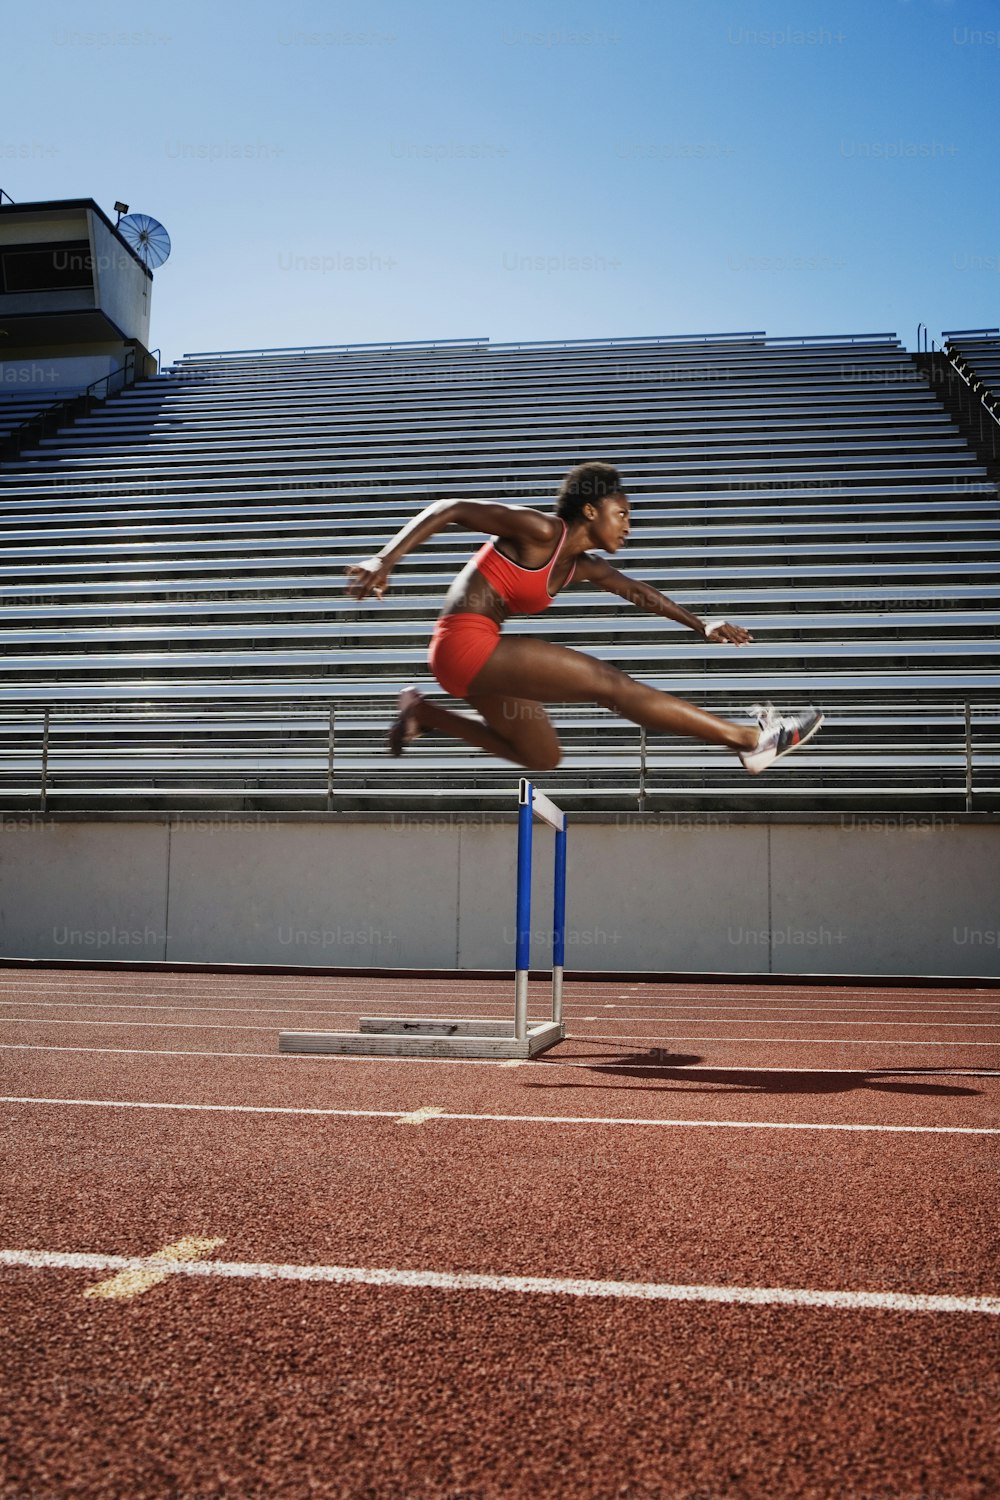 a woman jumping over a hurdle on a track